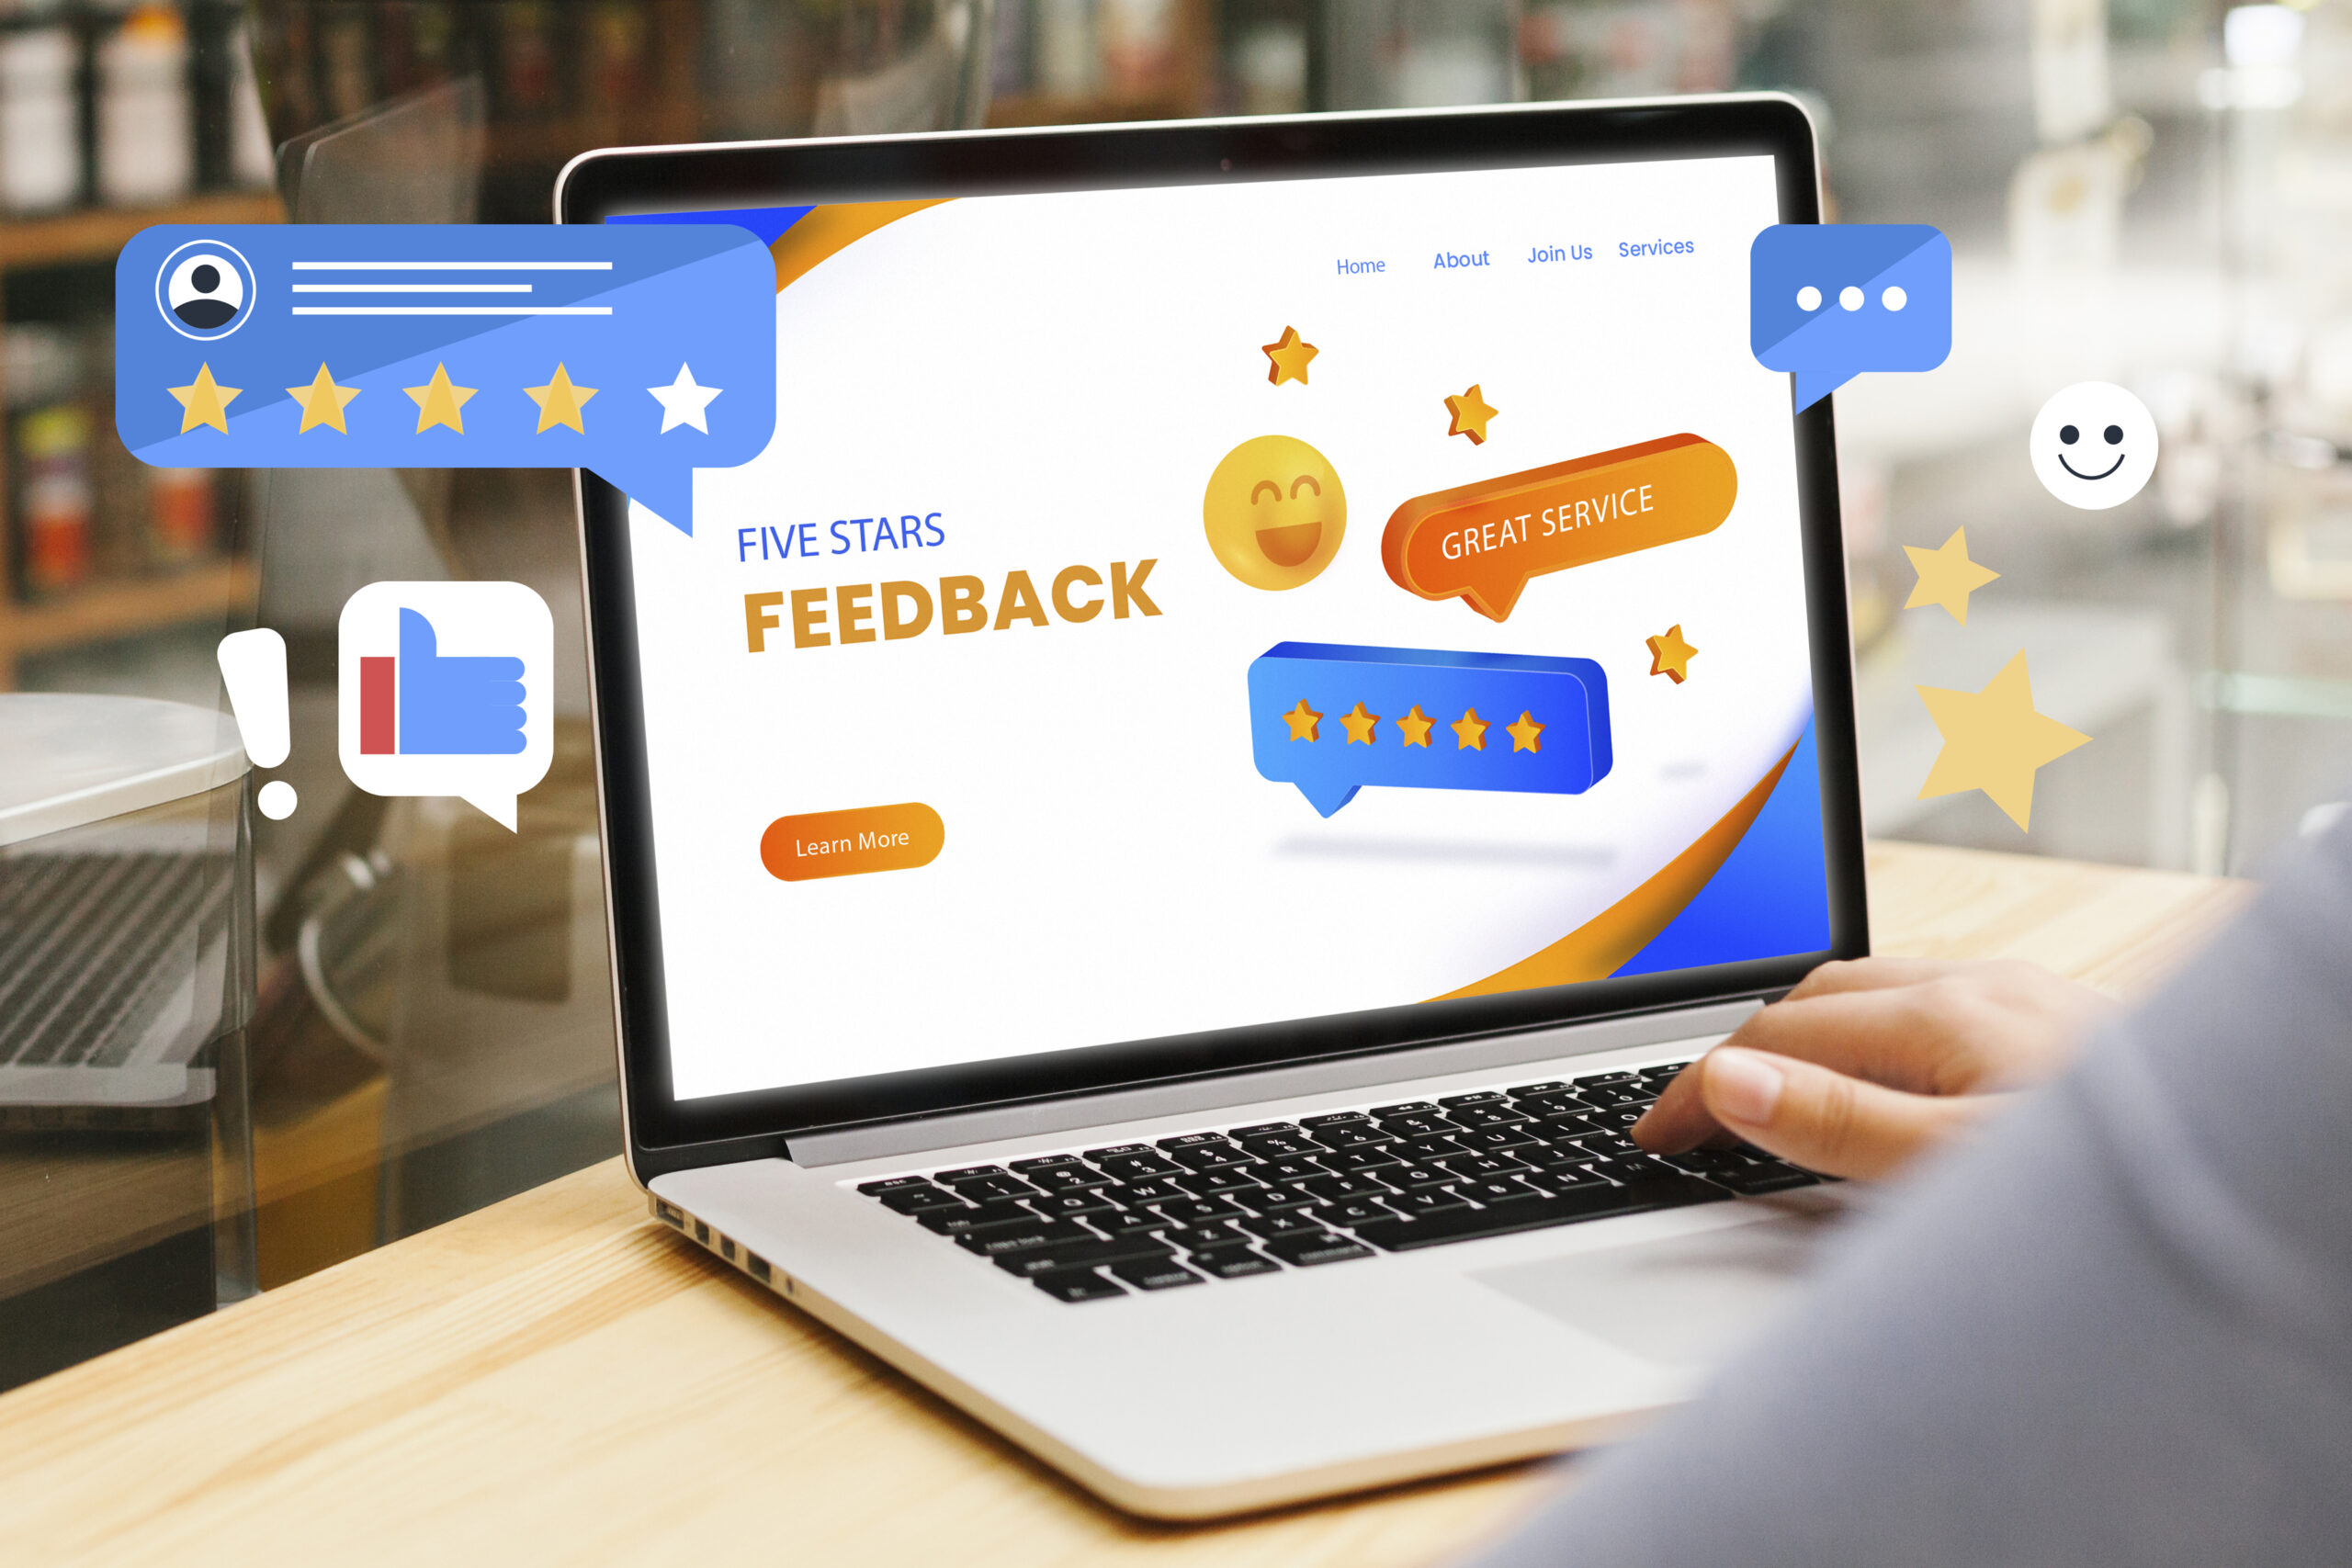 Facebook reviews: how to properly manage your reviews to boost your business?